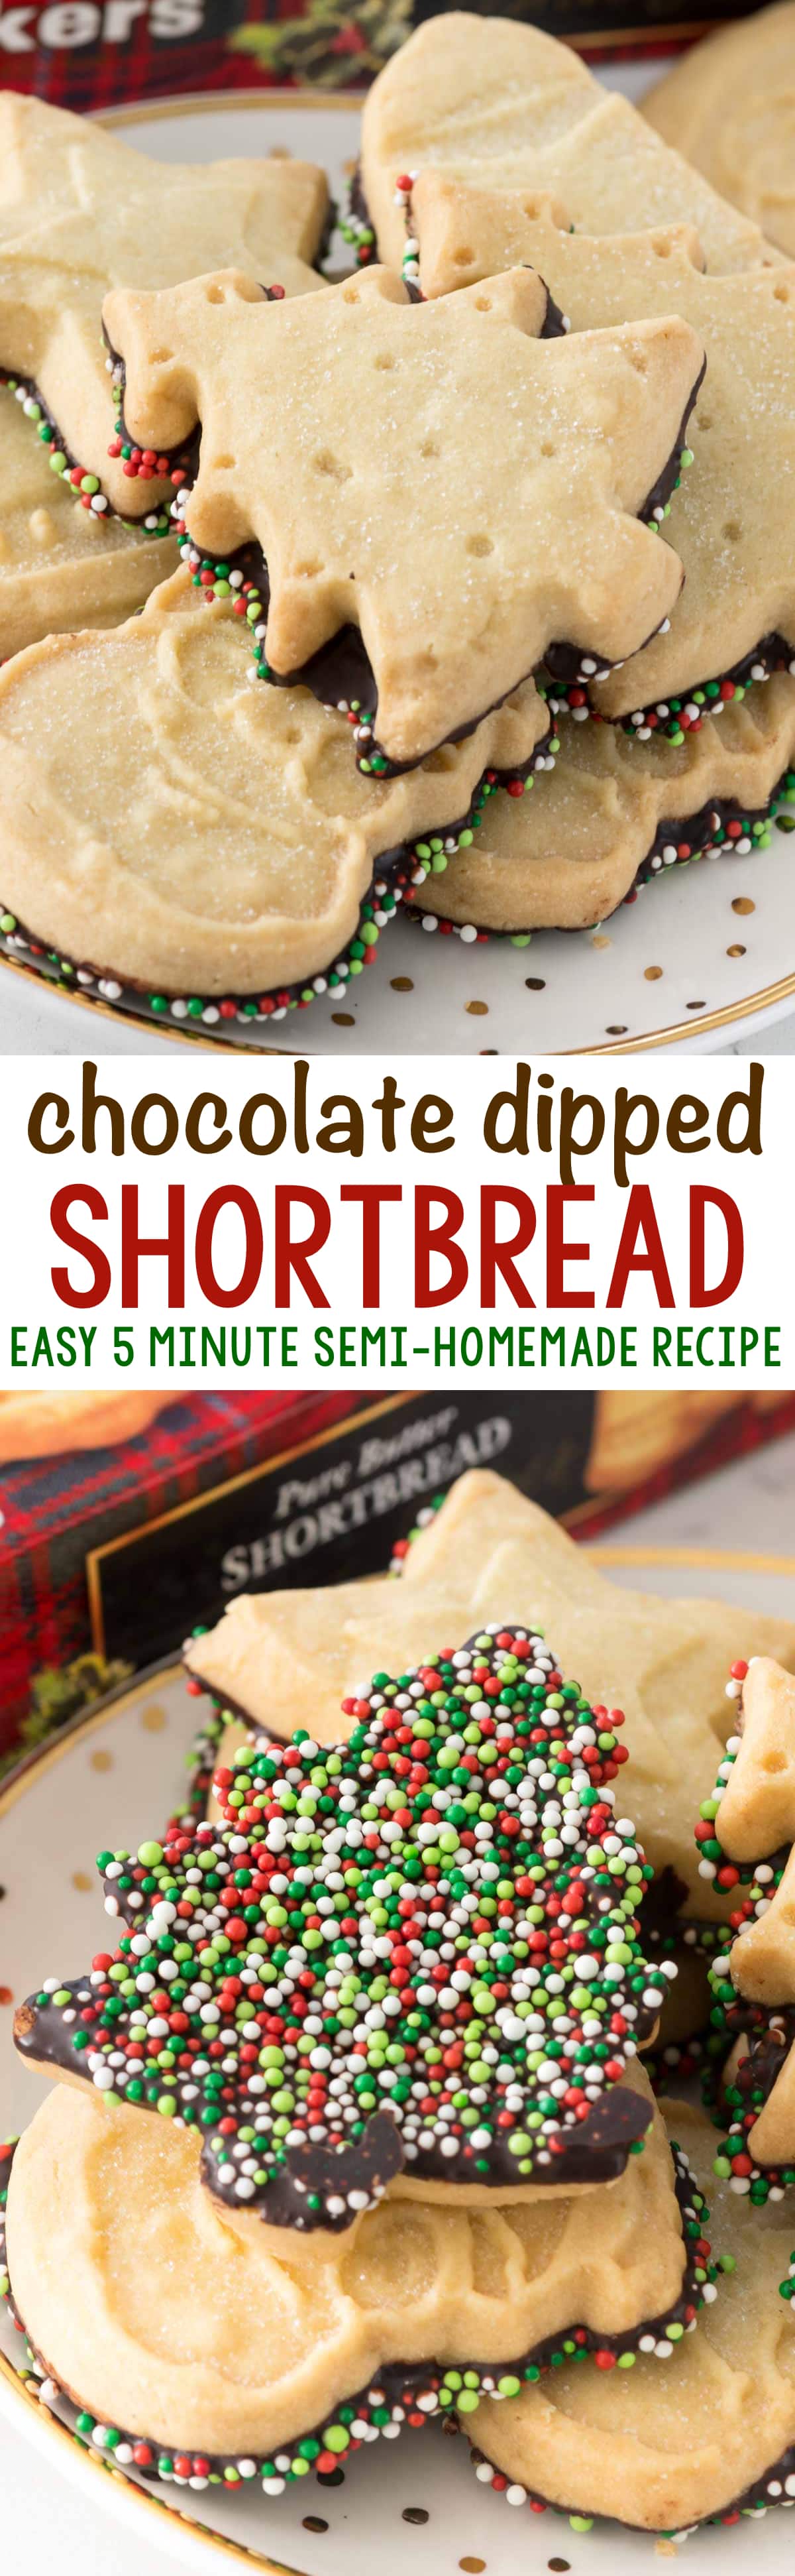 Chocolate Dipped Shortbread - an easy 5 minute semi-homemade recipe for when you need a quick dessert or gift!